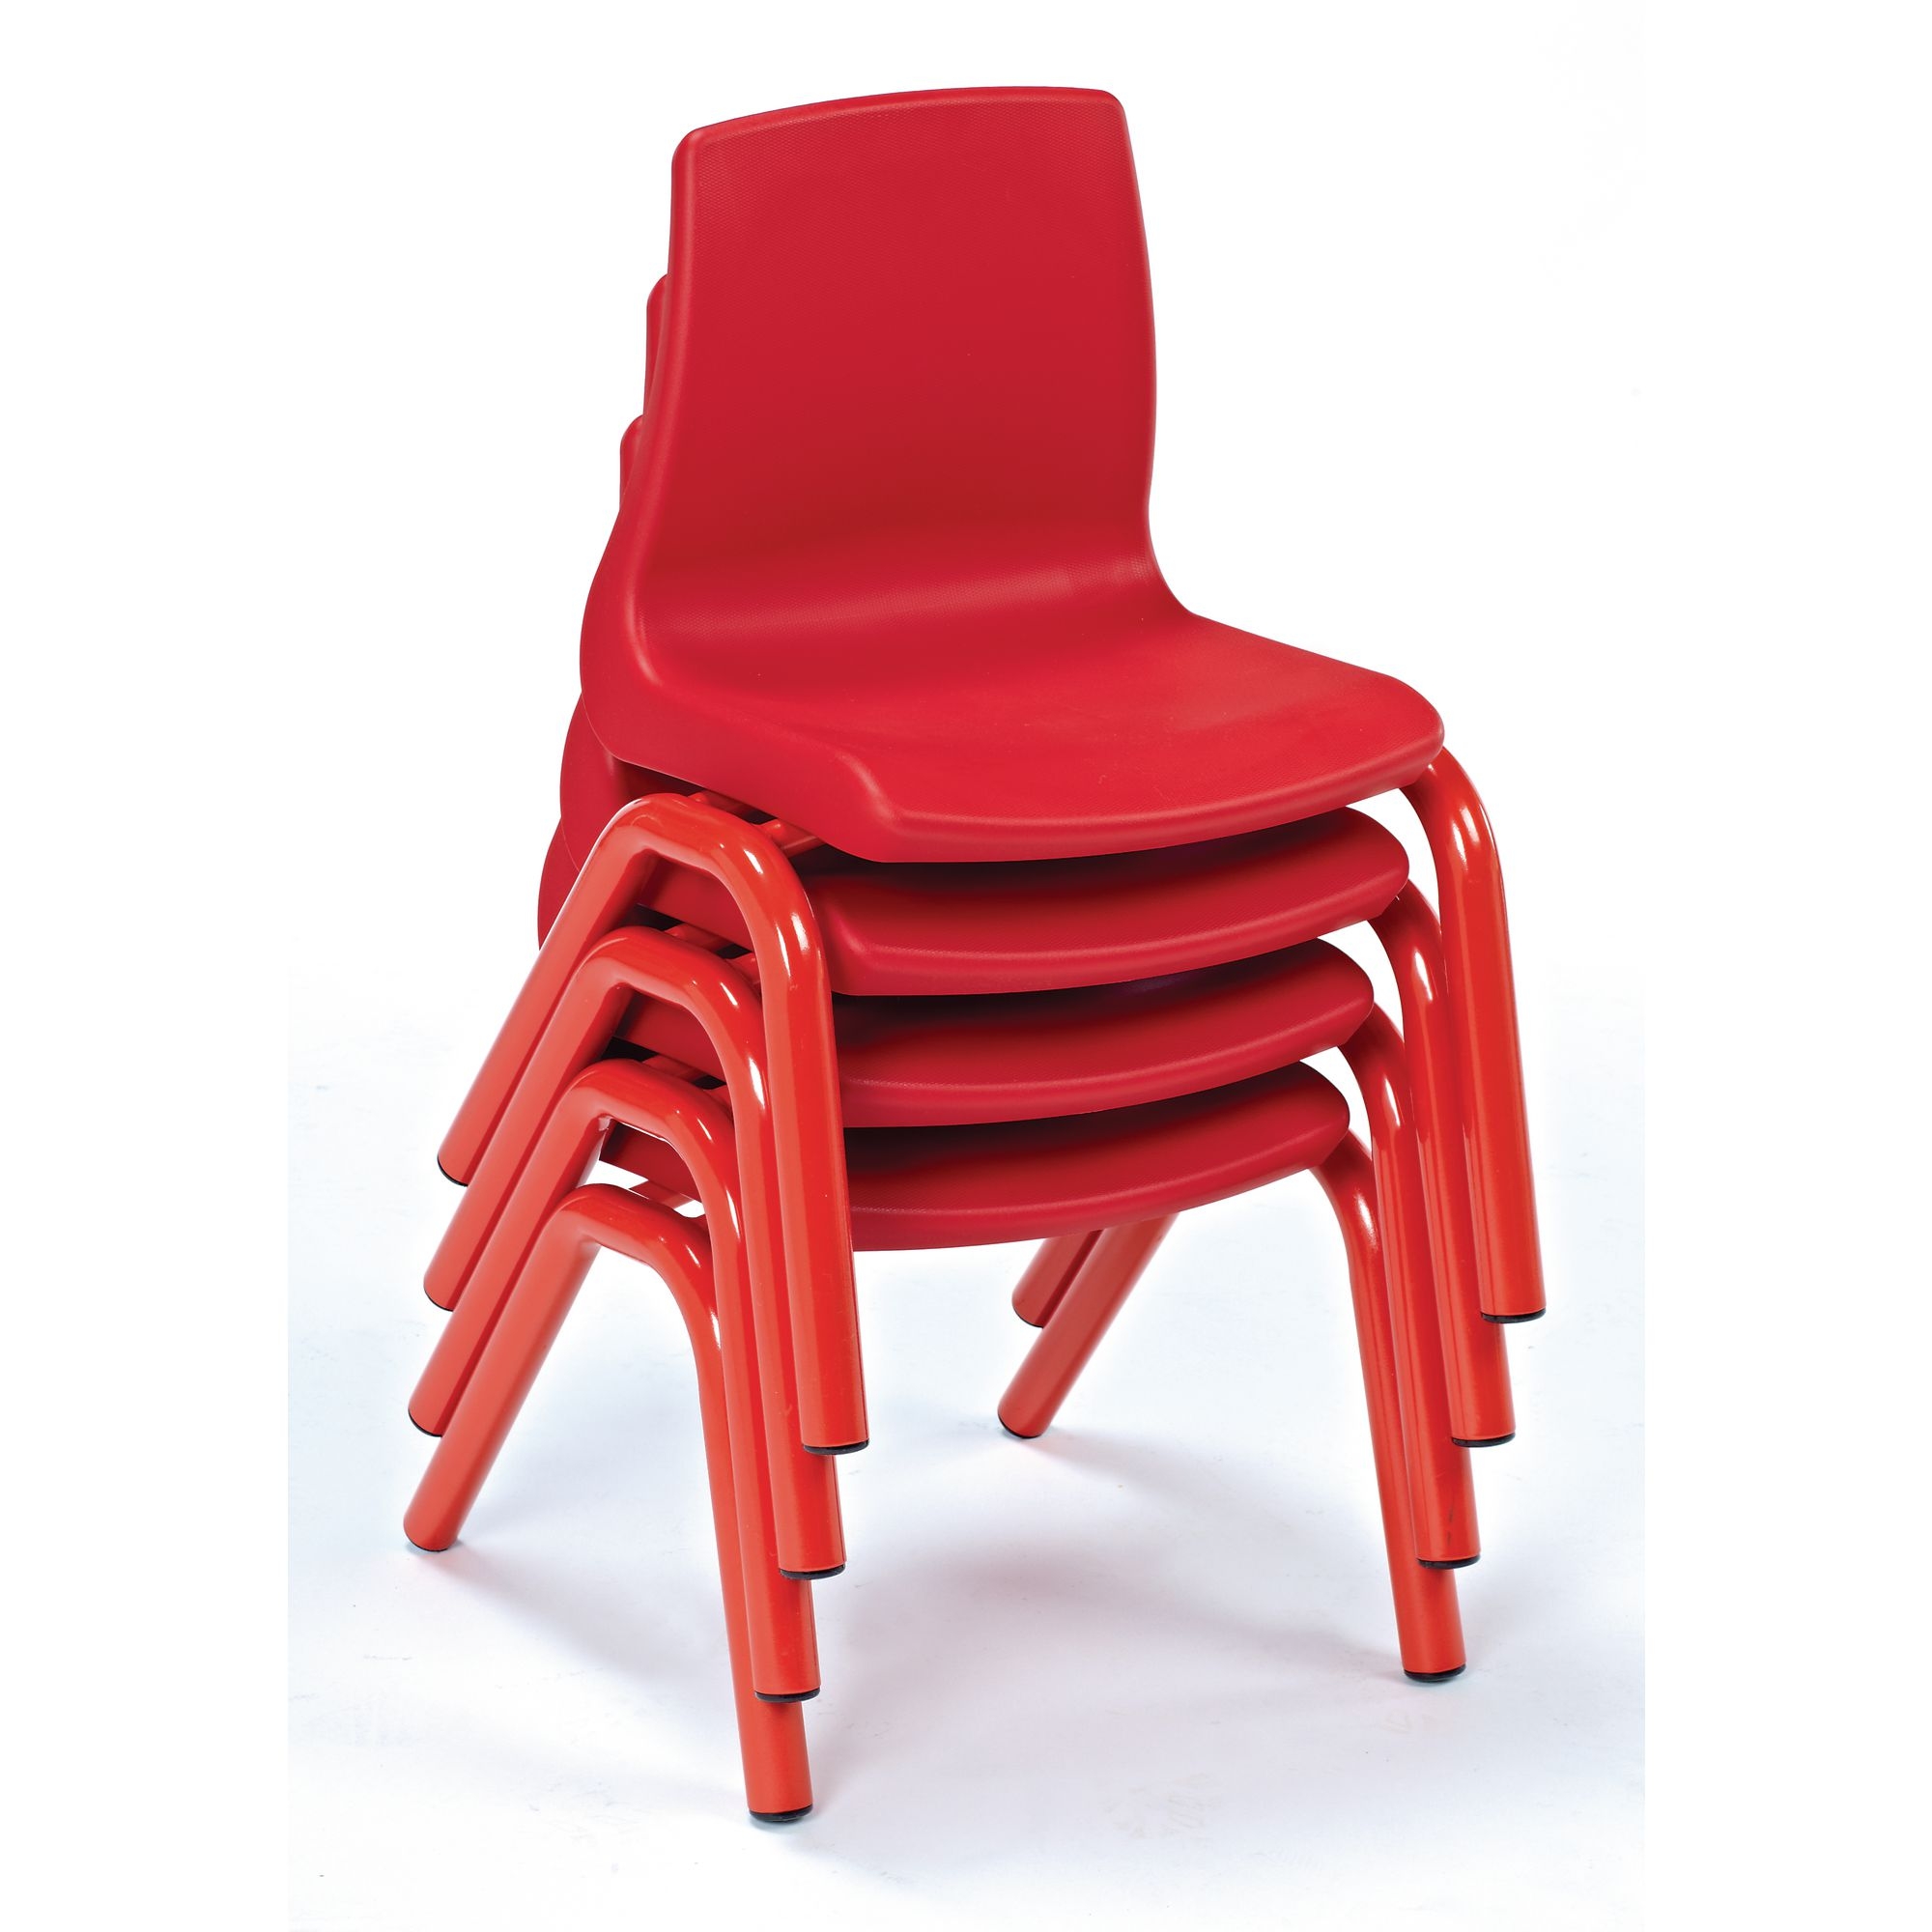 Harlequin Chairs - Pre School - Seat height: 200mm - Tangy Lime